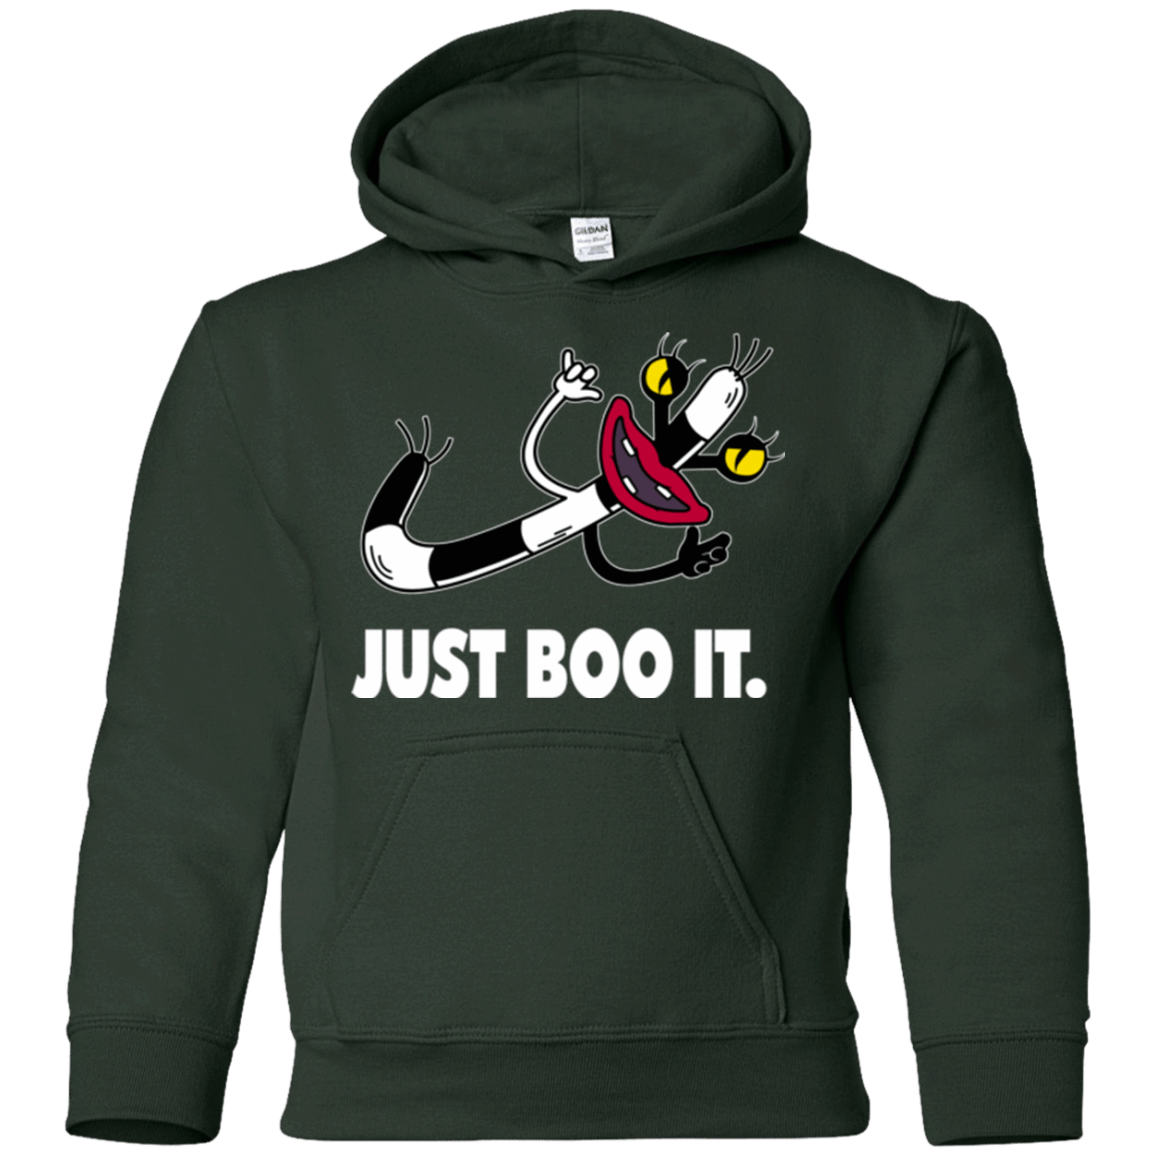 Sweatshirts Forest Green / YS Just Boo It Youth Hoodie